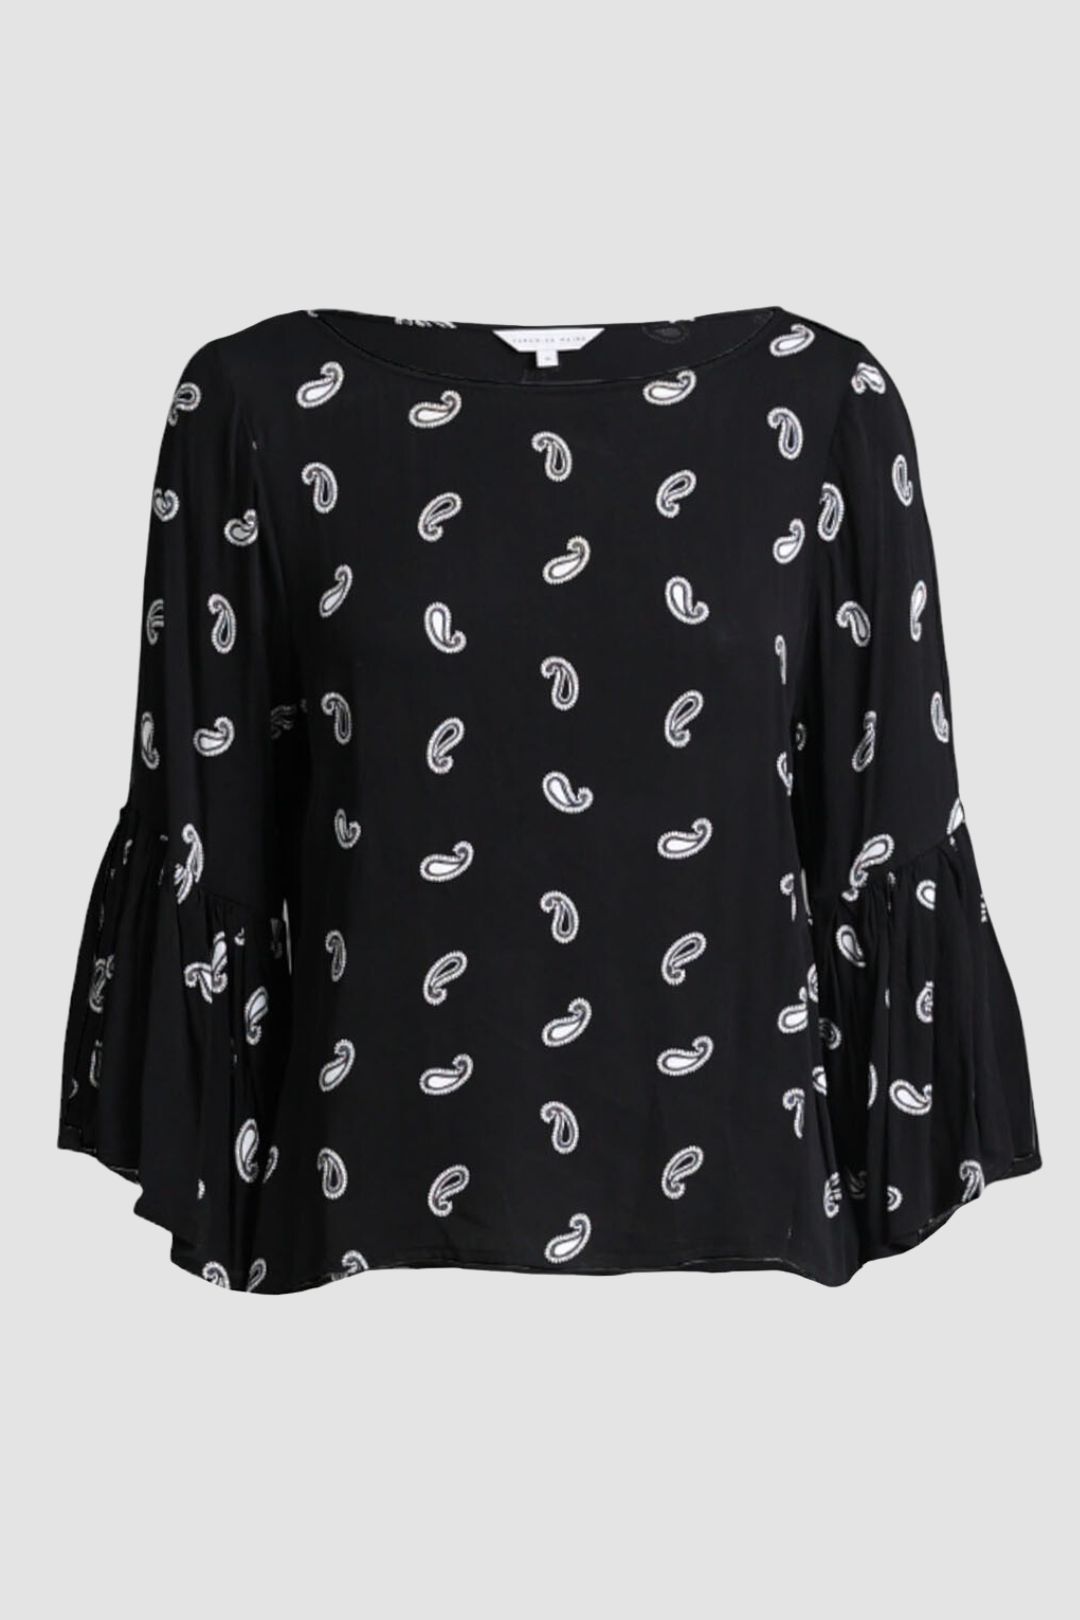 Veronika Maine - Frill Sleeve Blouse in Black and White Paisley